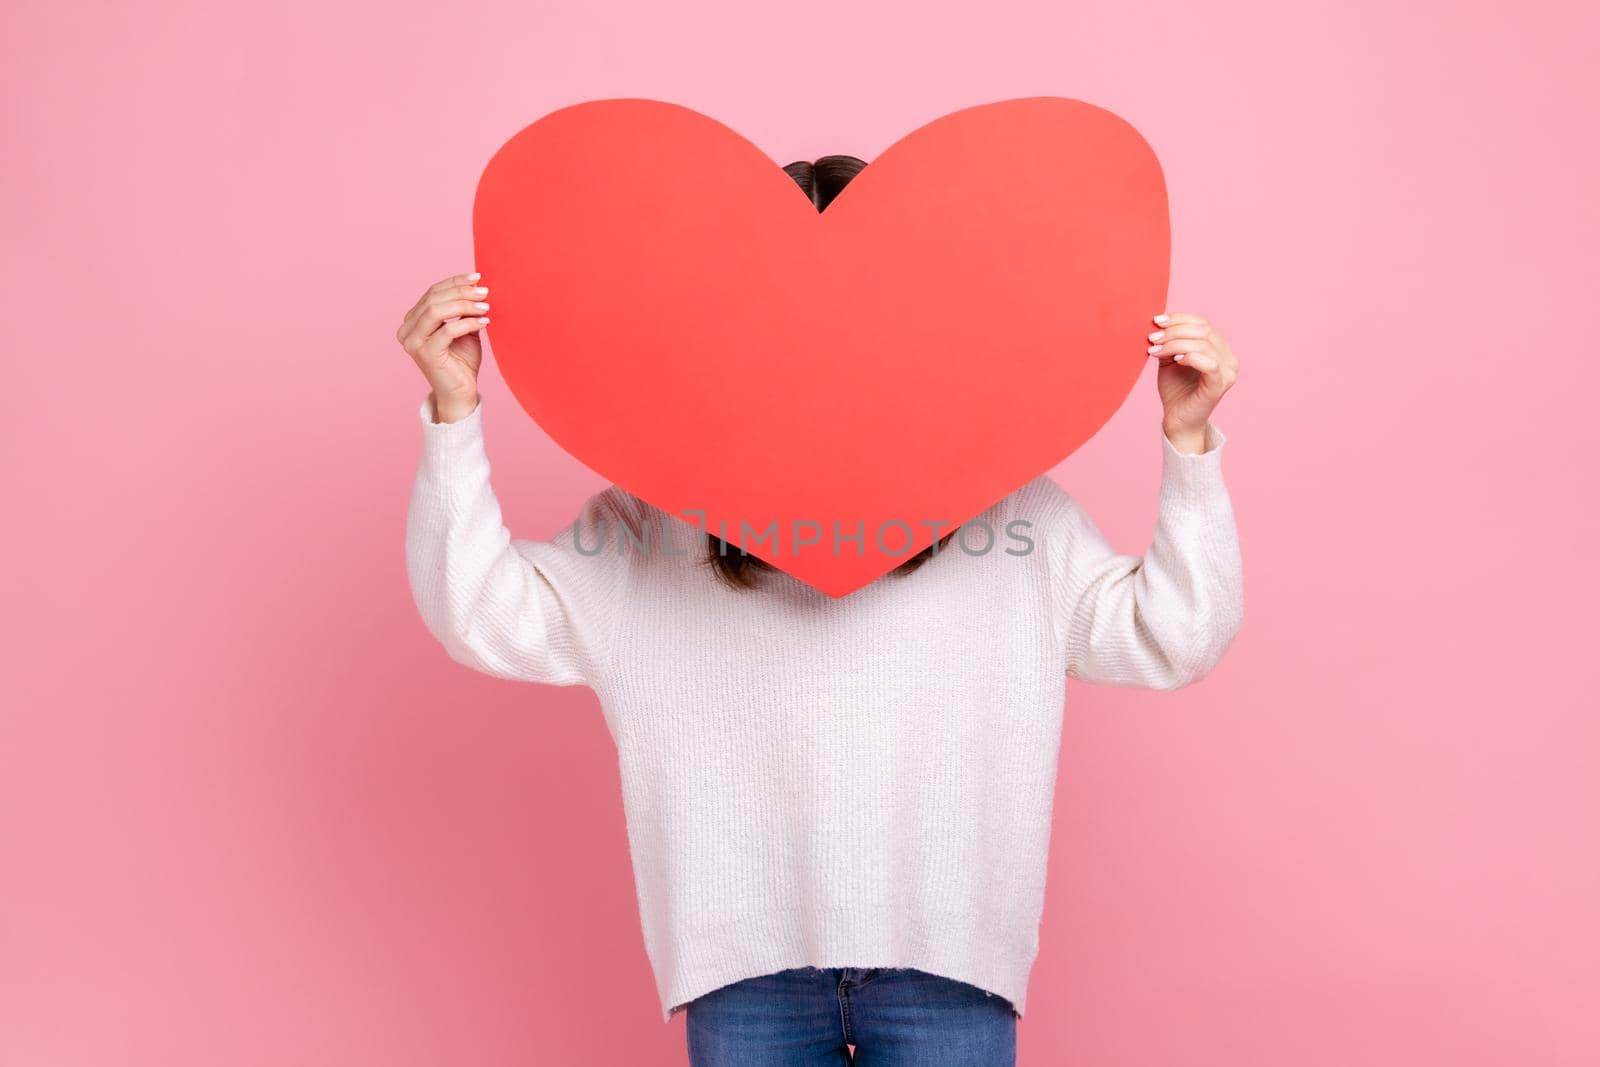 Unknown shy romantic woman covering her face with big red heart, hesitate to confess her feelings, wearing white casual style sweater. Indoor studio shot isolated on pink background.